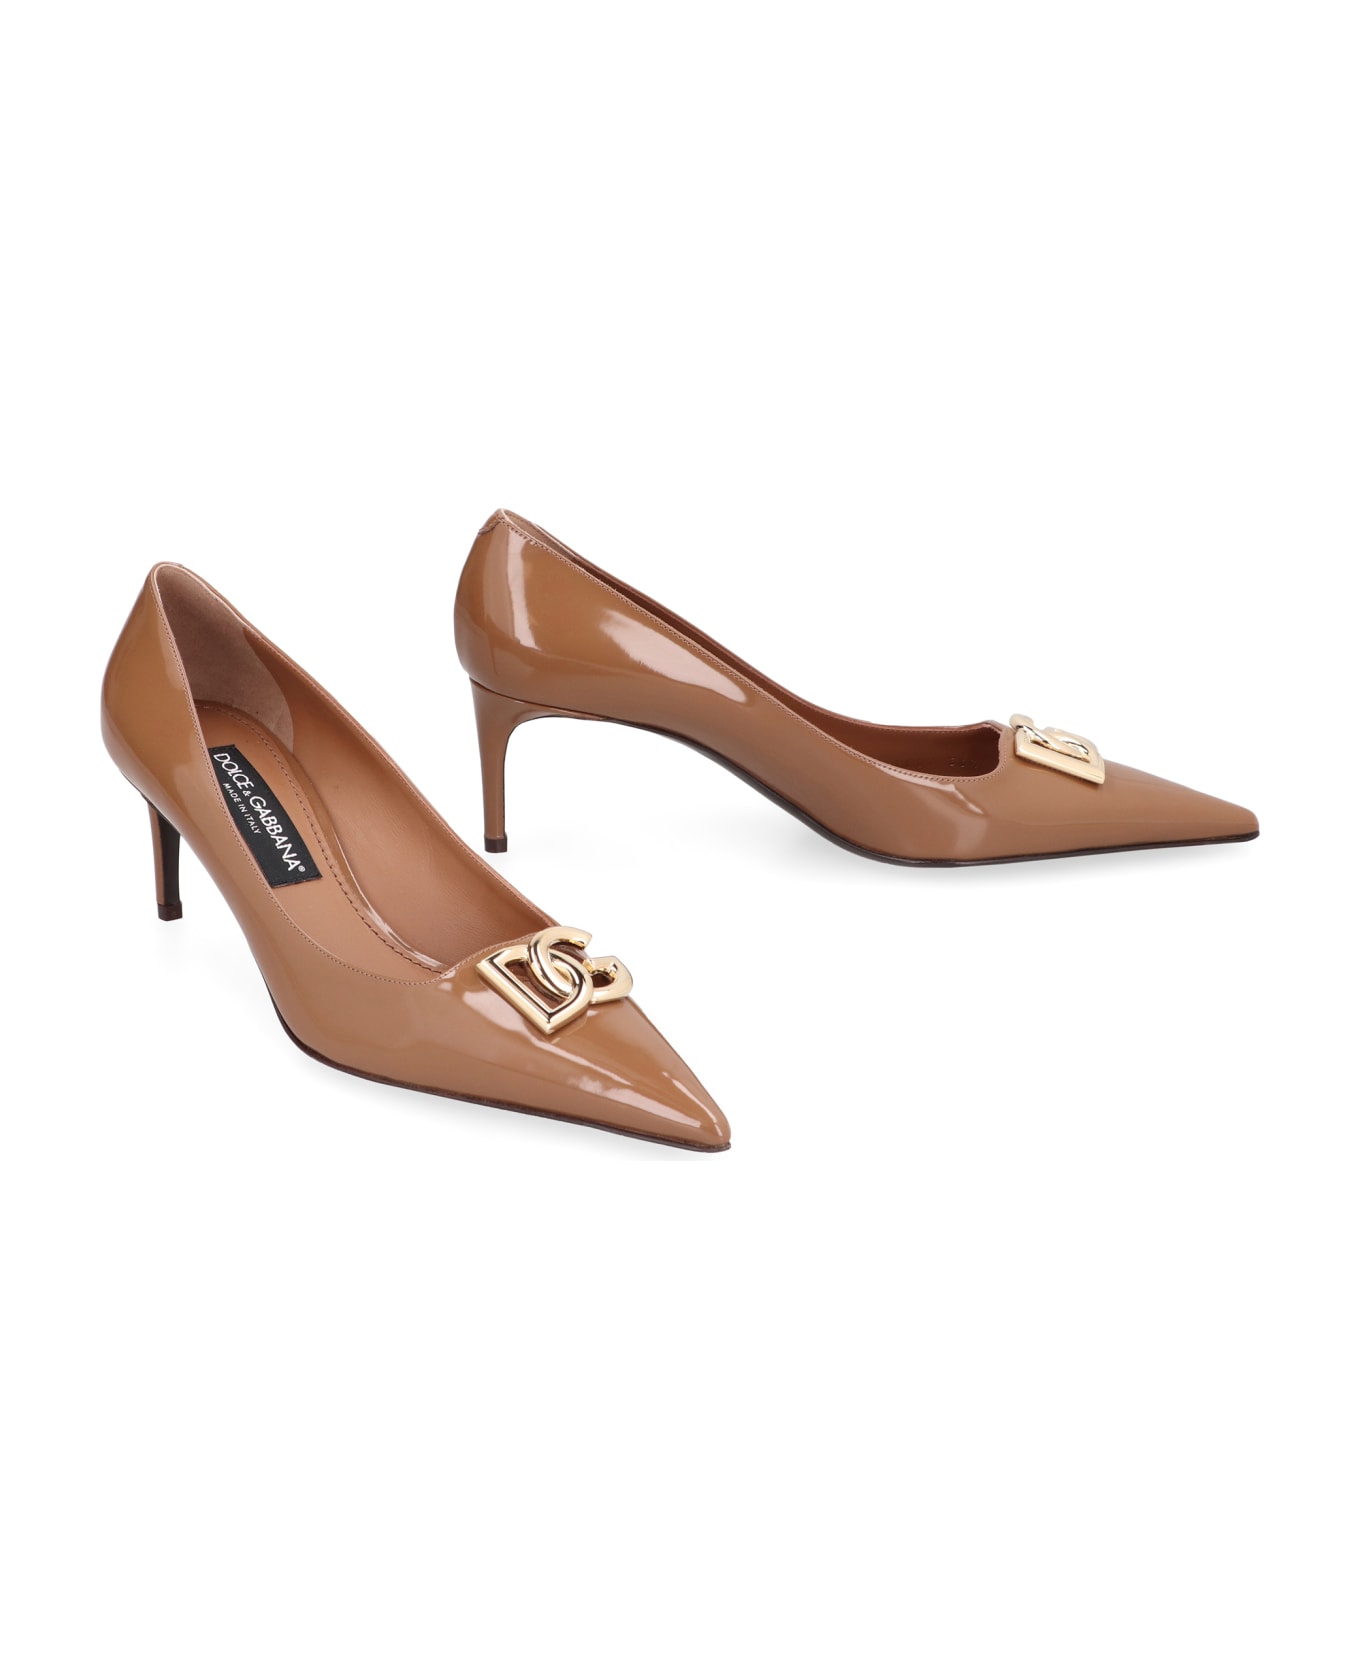 Dolce & Gabbana Leather Pumps - brown ハイヒール